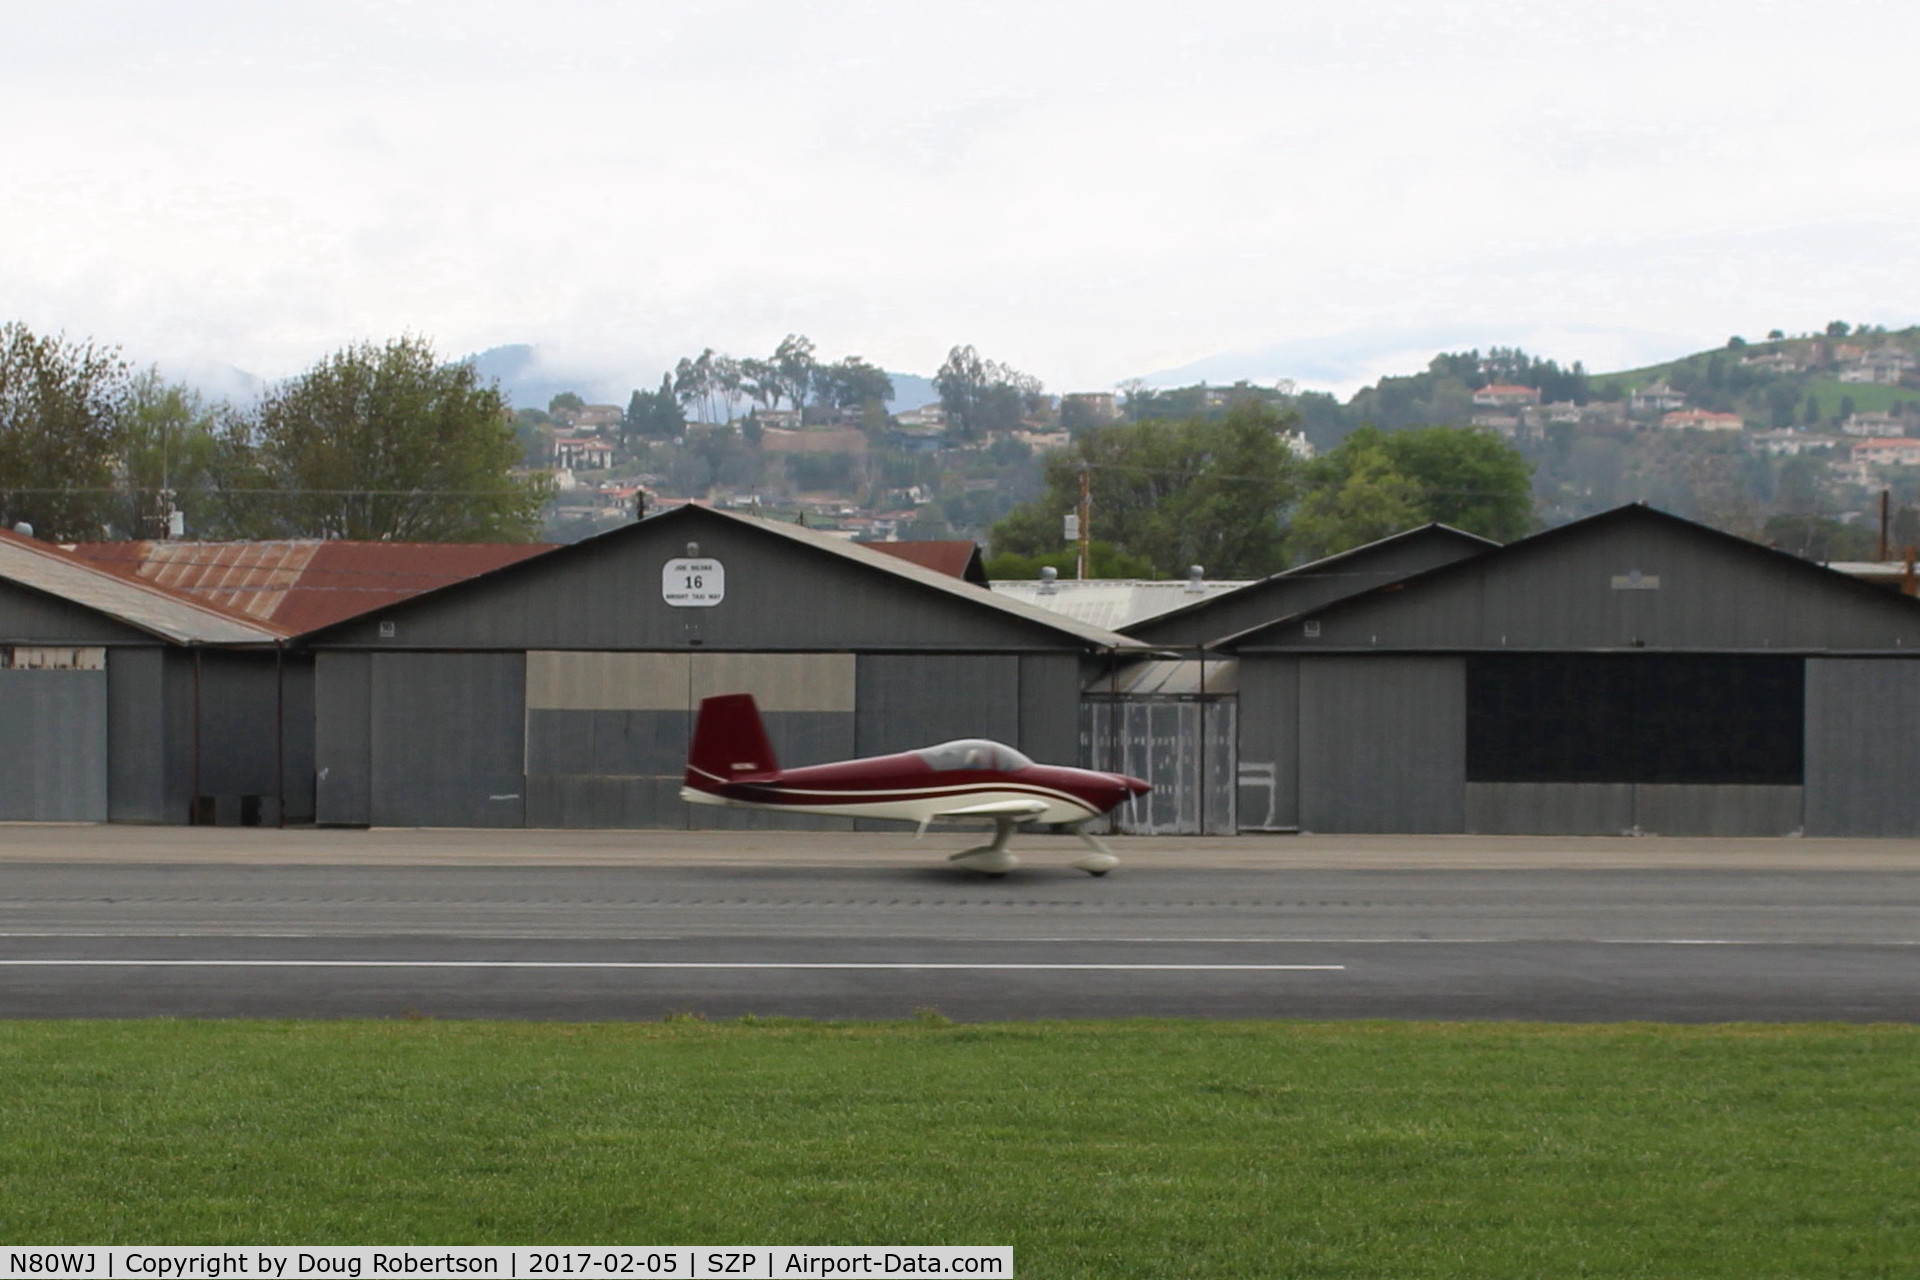 N80WJ, 2014 Vans RV-7A C/N 72575, 2015 Richmond VAN's RV-7A, ECI TITAN IOX-360-A4H1N 191 Hp, taxi to Rwy 22